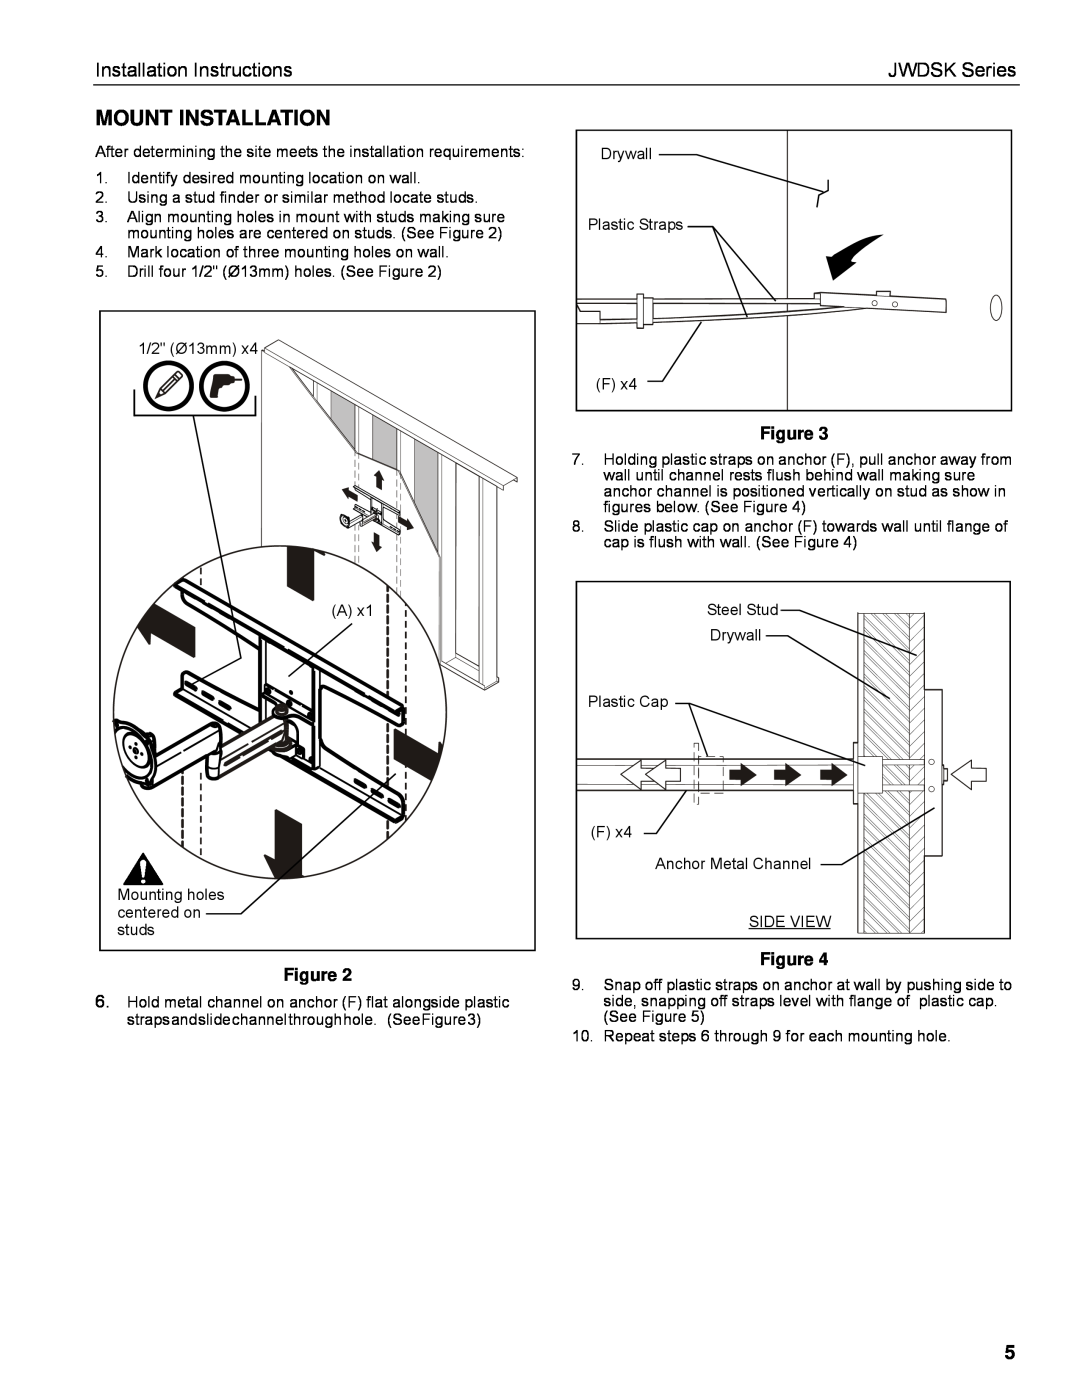 Chief Manufacturing installation instructions Mount Installation, Installation Instructions, JWDSK Series 